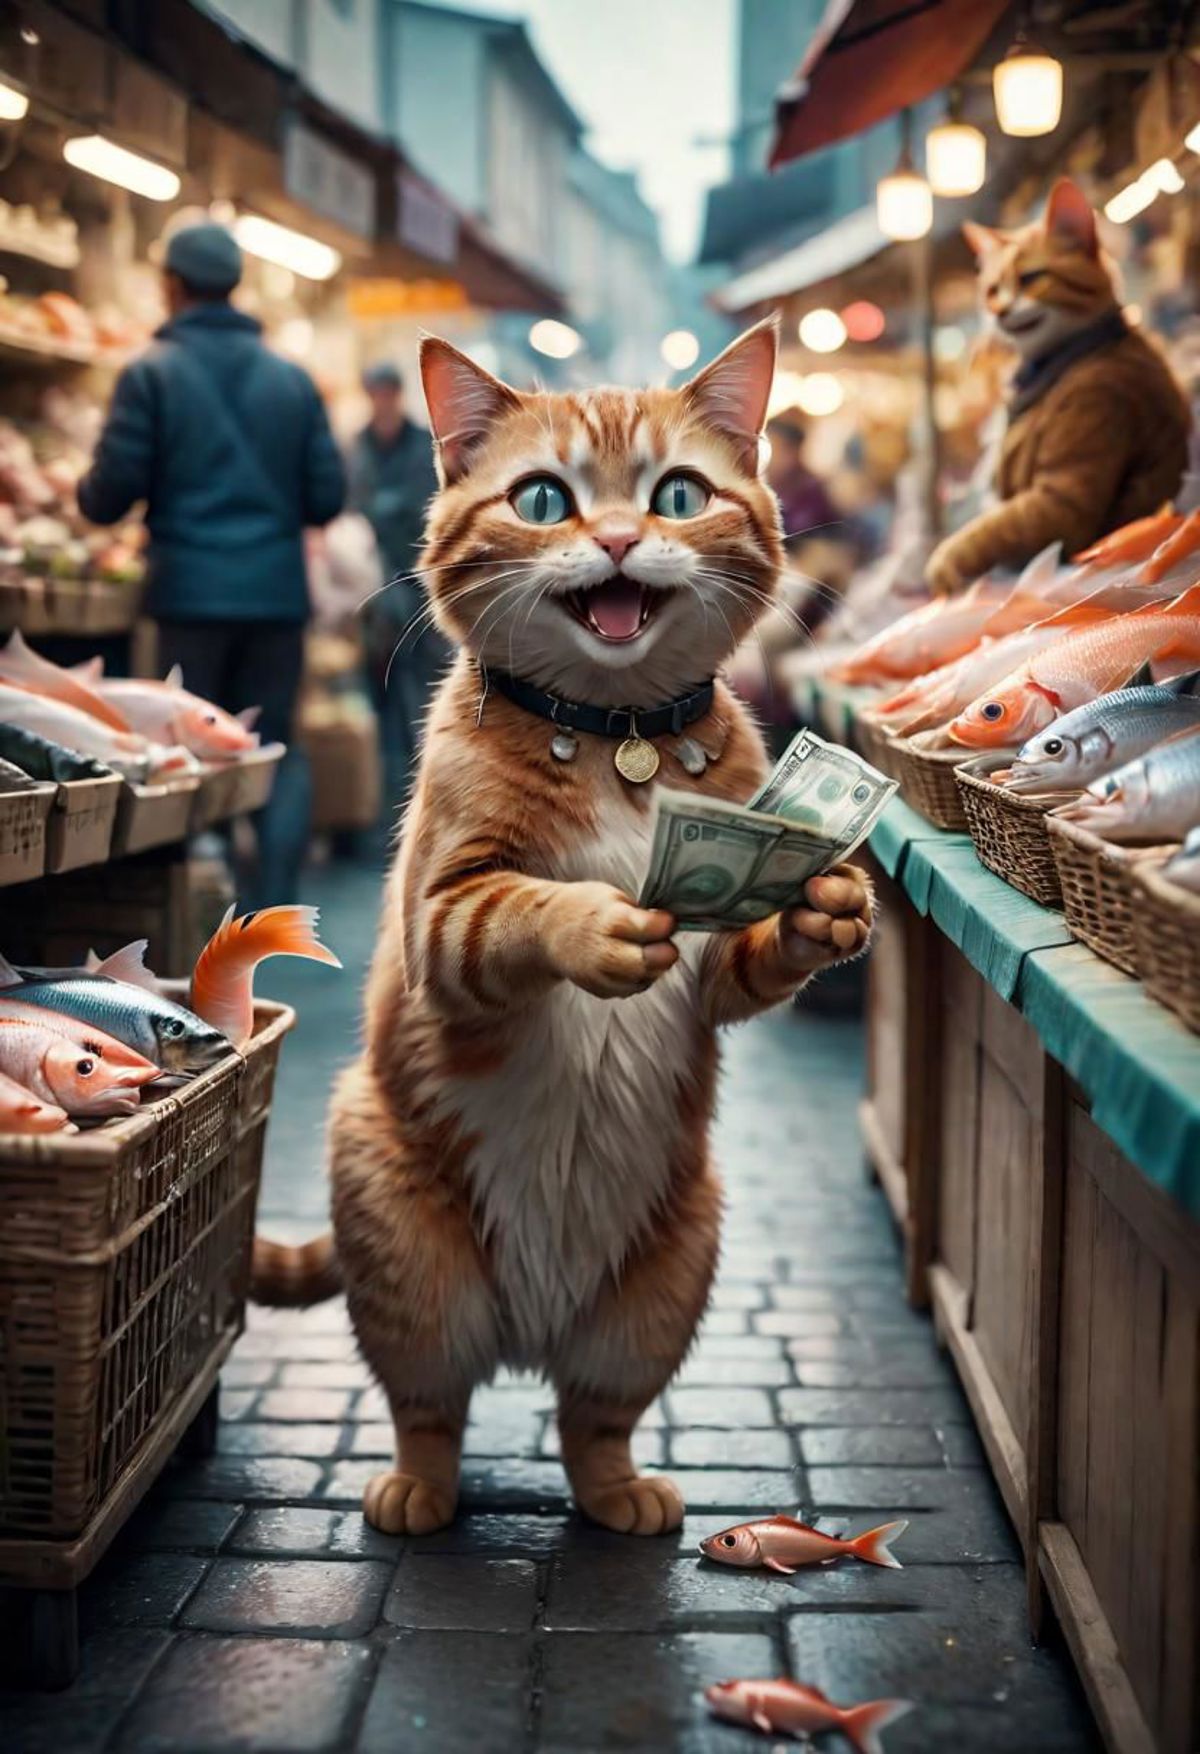 A cat holding a piece of money while standing in the middle of a fish market.